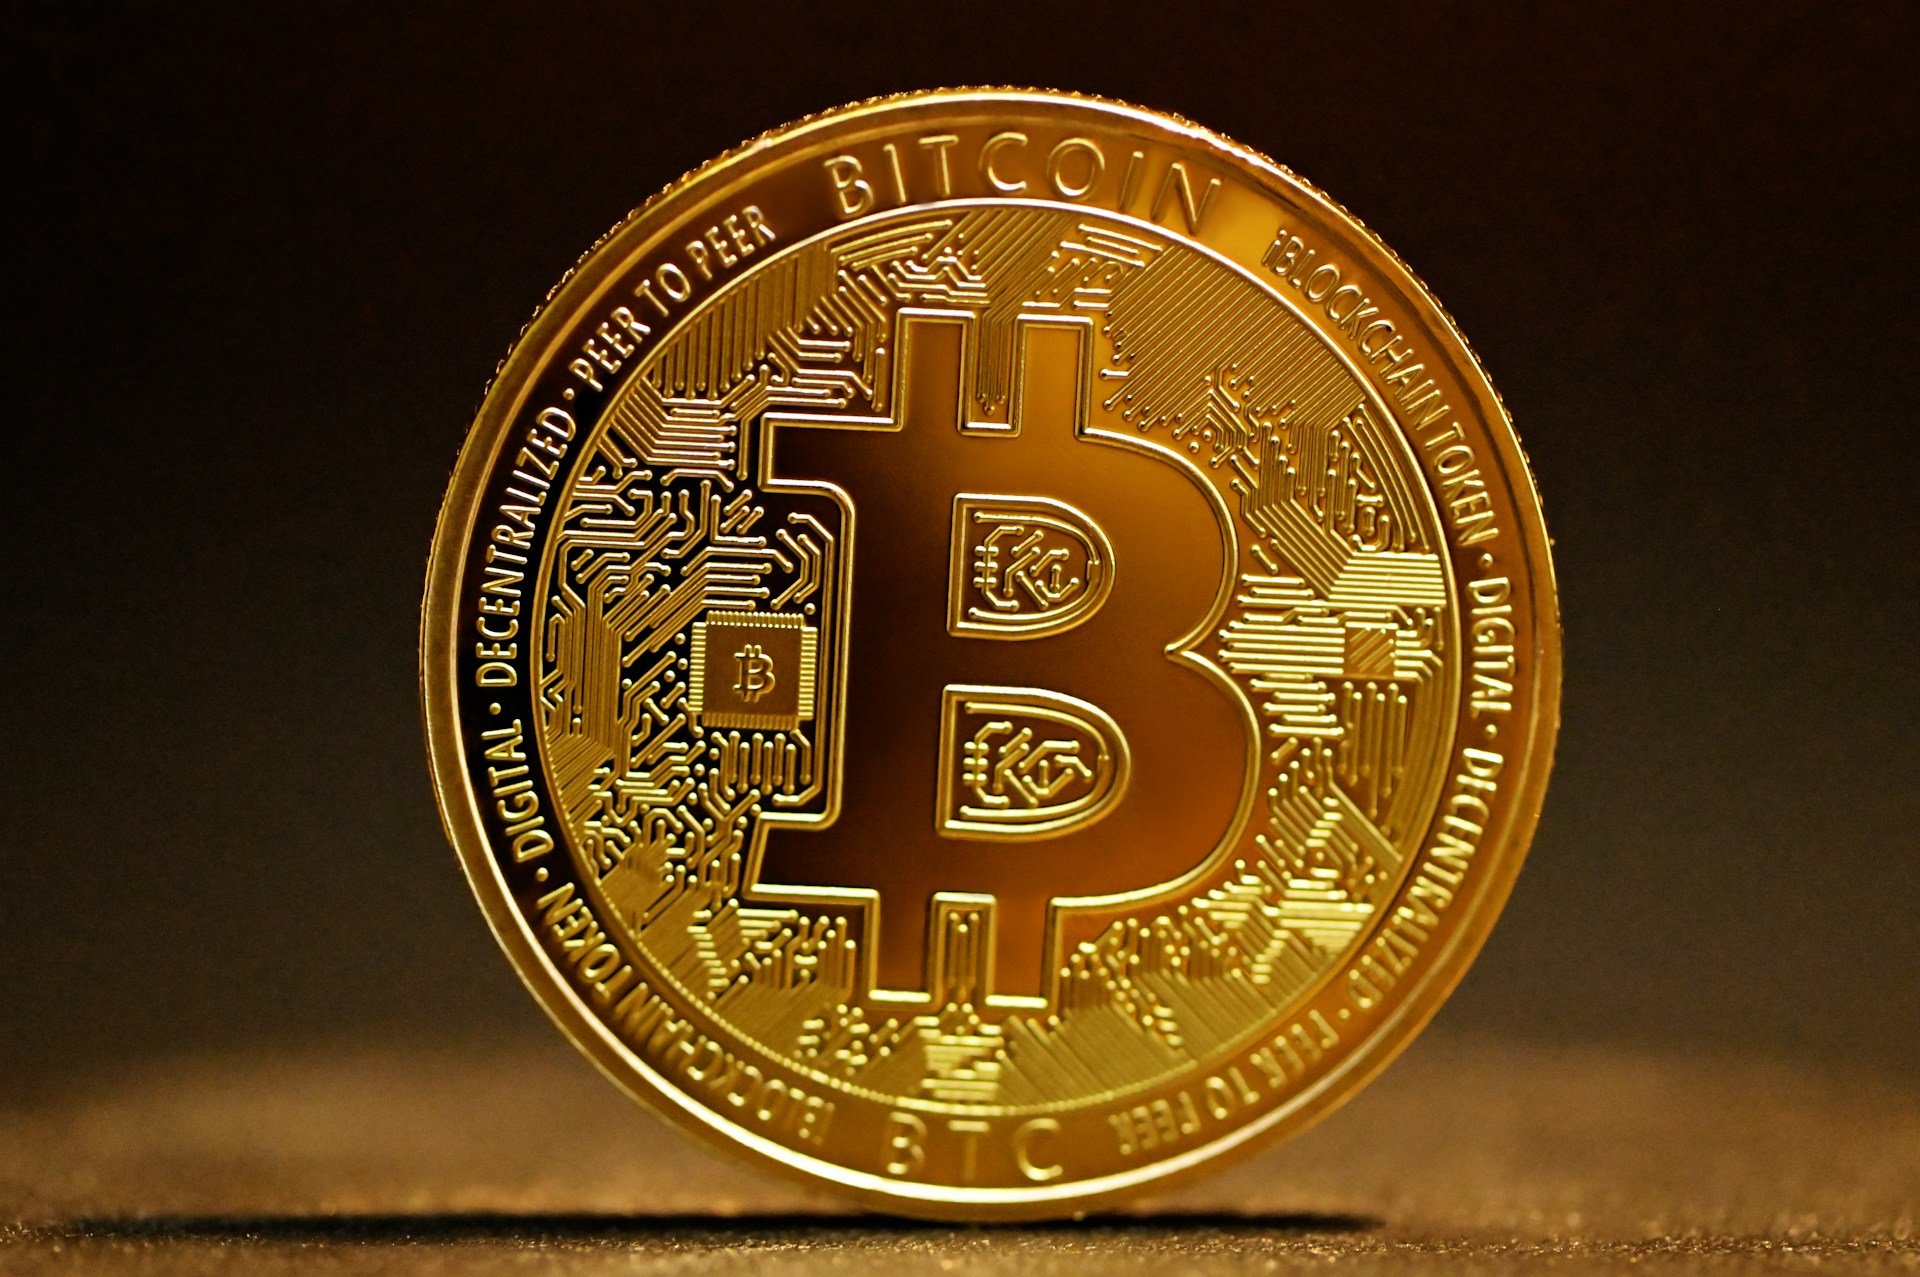 DMM Bitcoin announces plan to procure funds to cover losses from the theft of over $300 million in bitcoin, ensuring users' deposits are fully guaranteed.